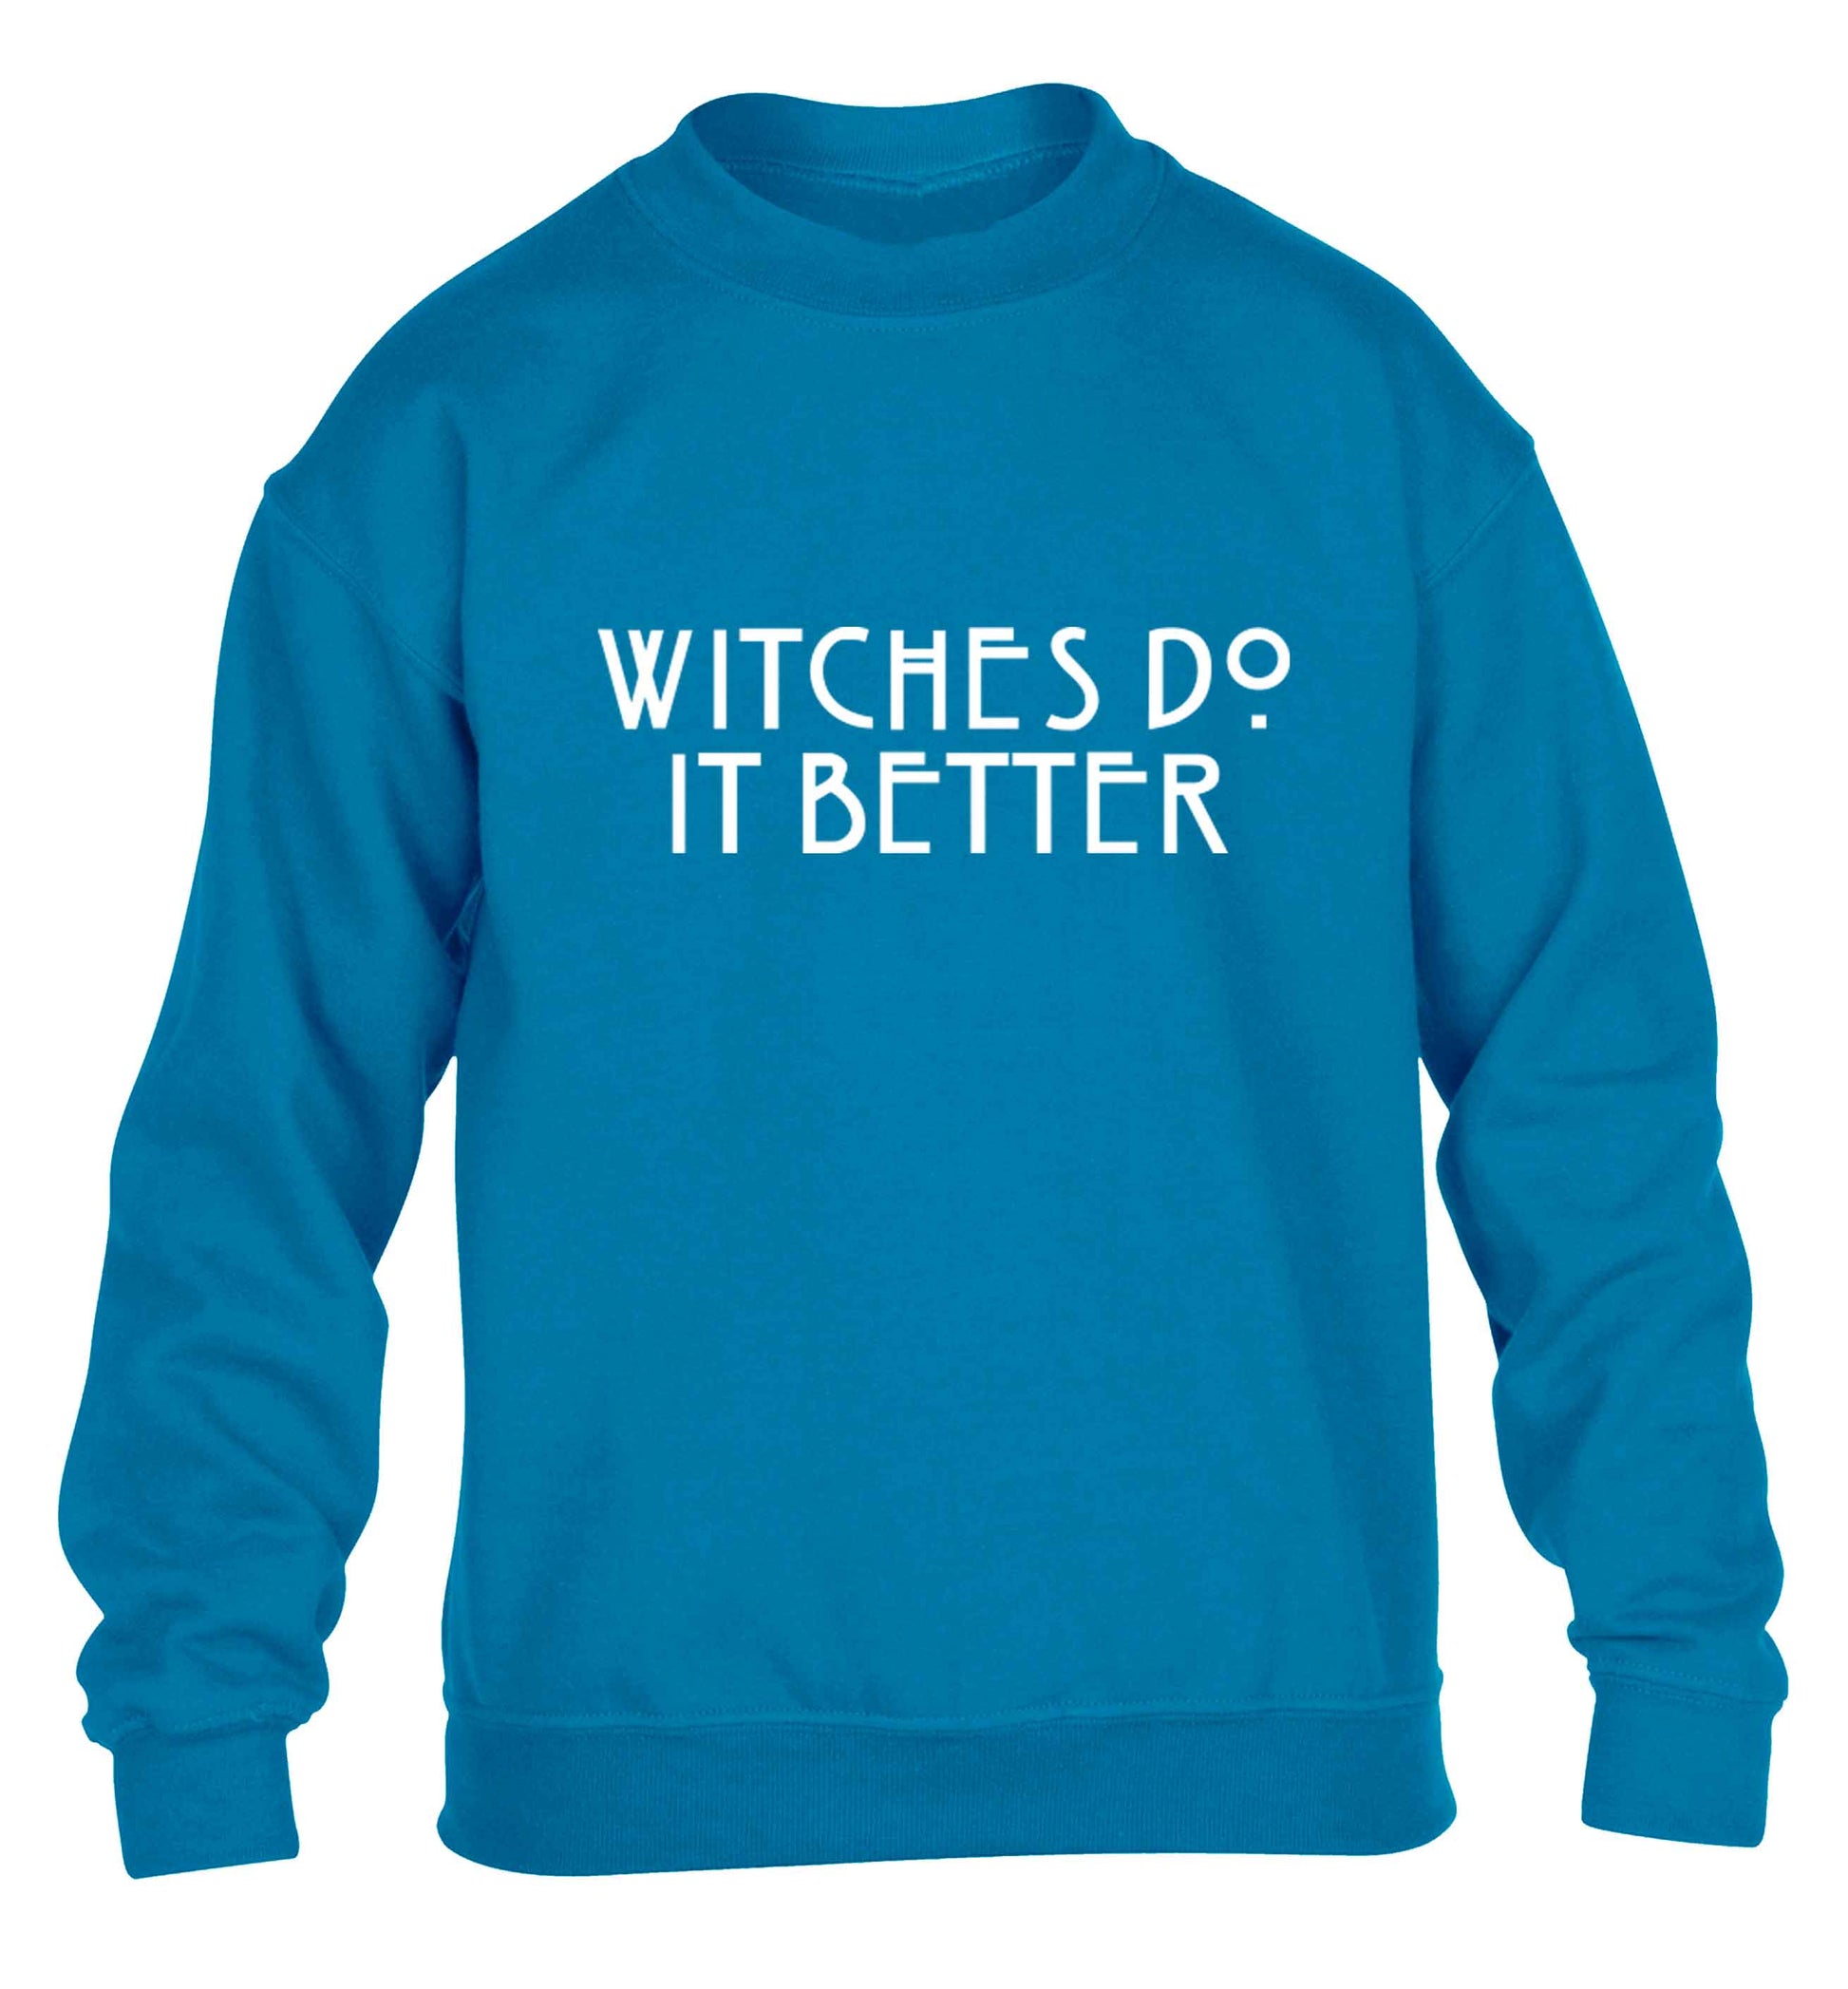 Witches do it better children's blue sweater 12-13 Years